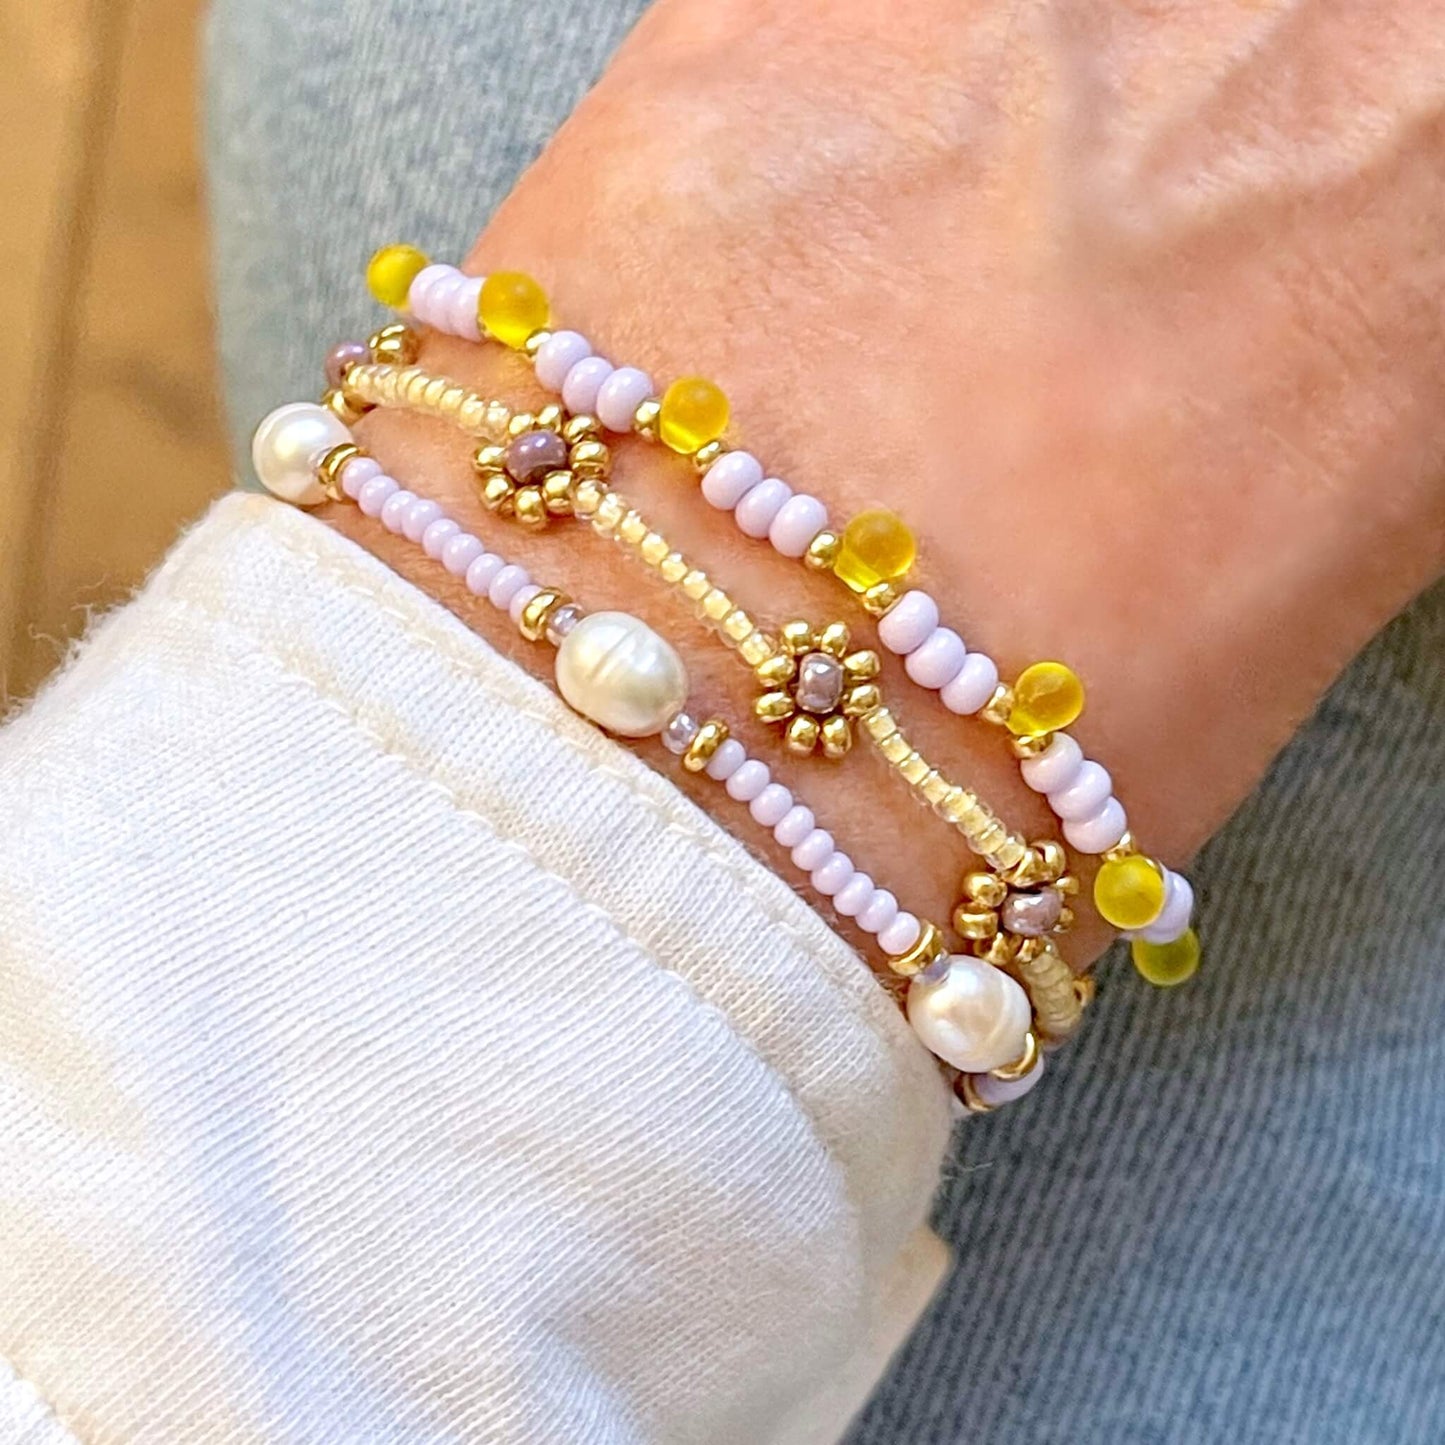 Lavender and yellow seed bead and freshwater pearl bracelet stack of 3. Delicate stretch bracelets for women.